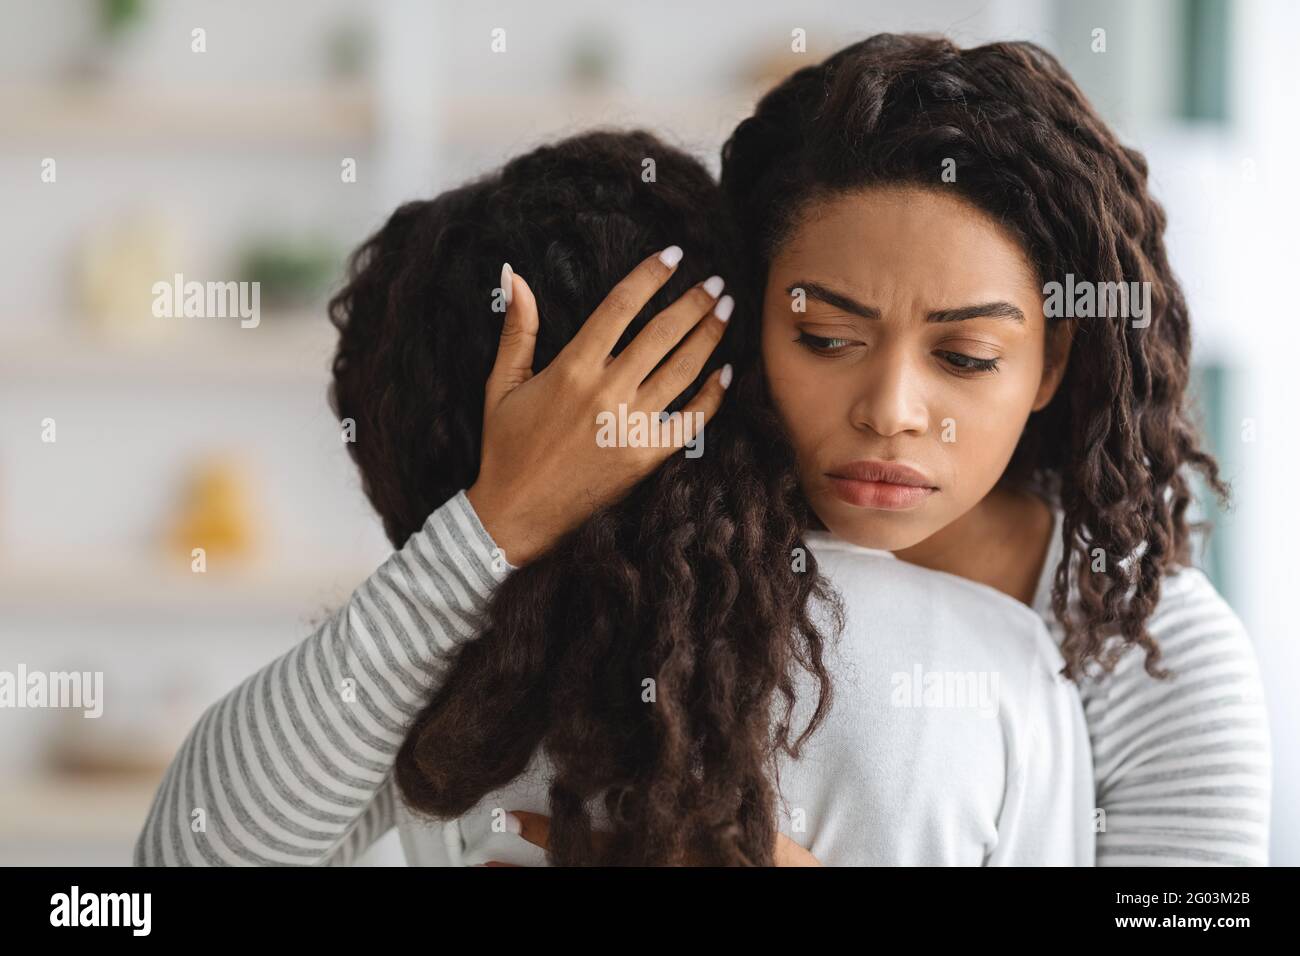 Worried young black mother comforting her crying daughter Stock Photo